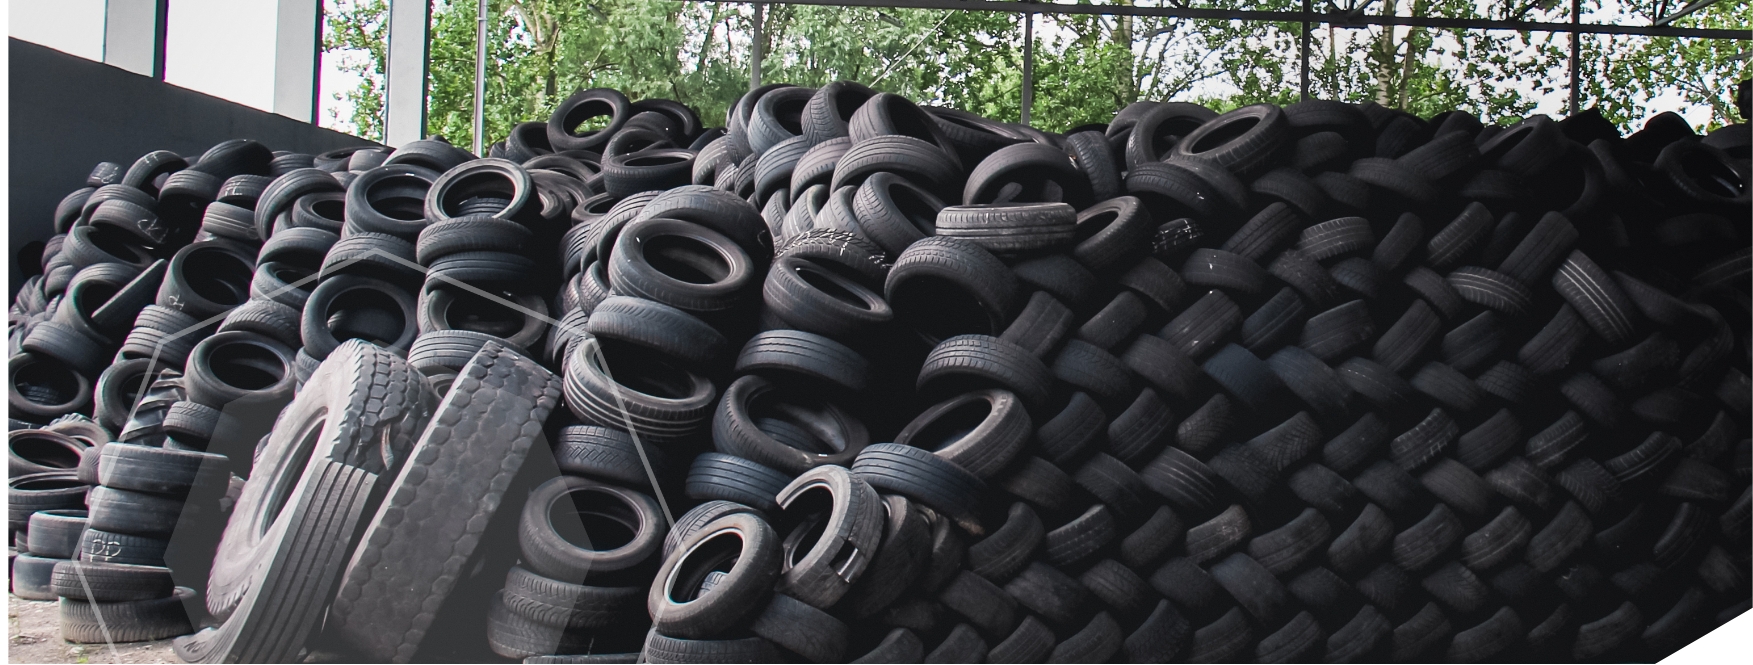 Old black tires in a large pile